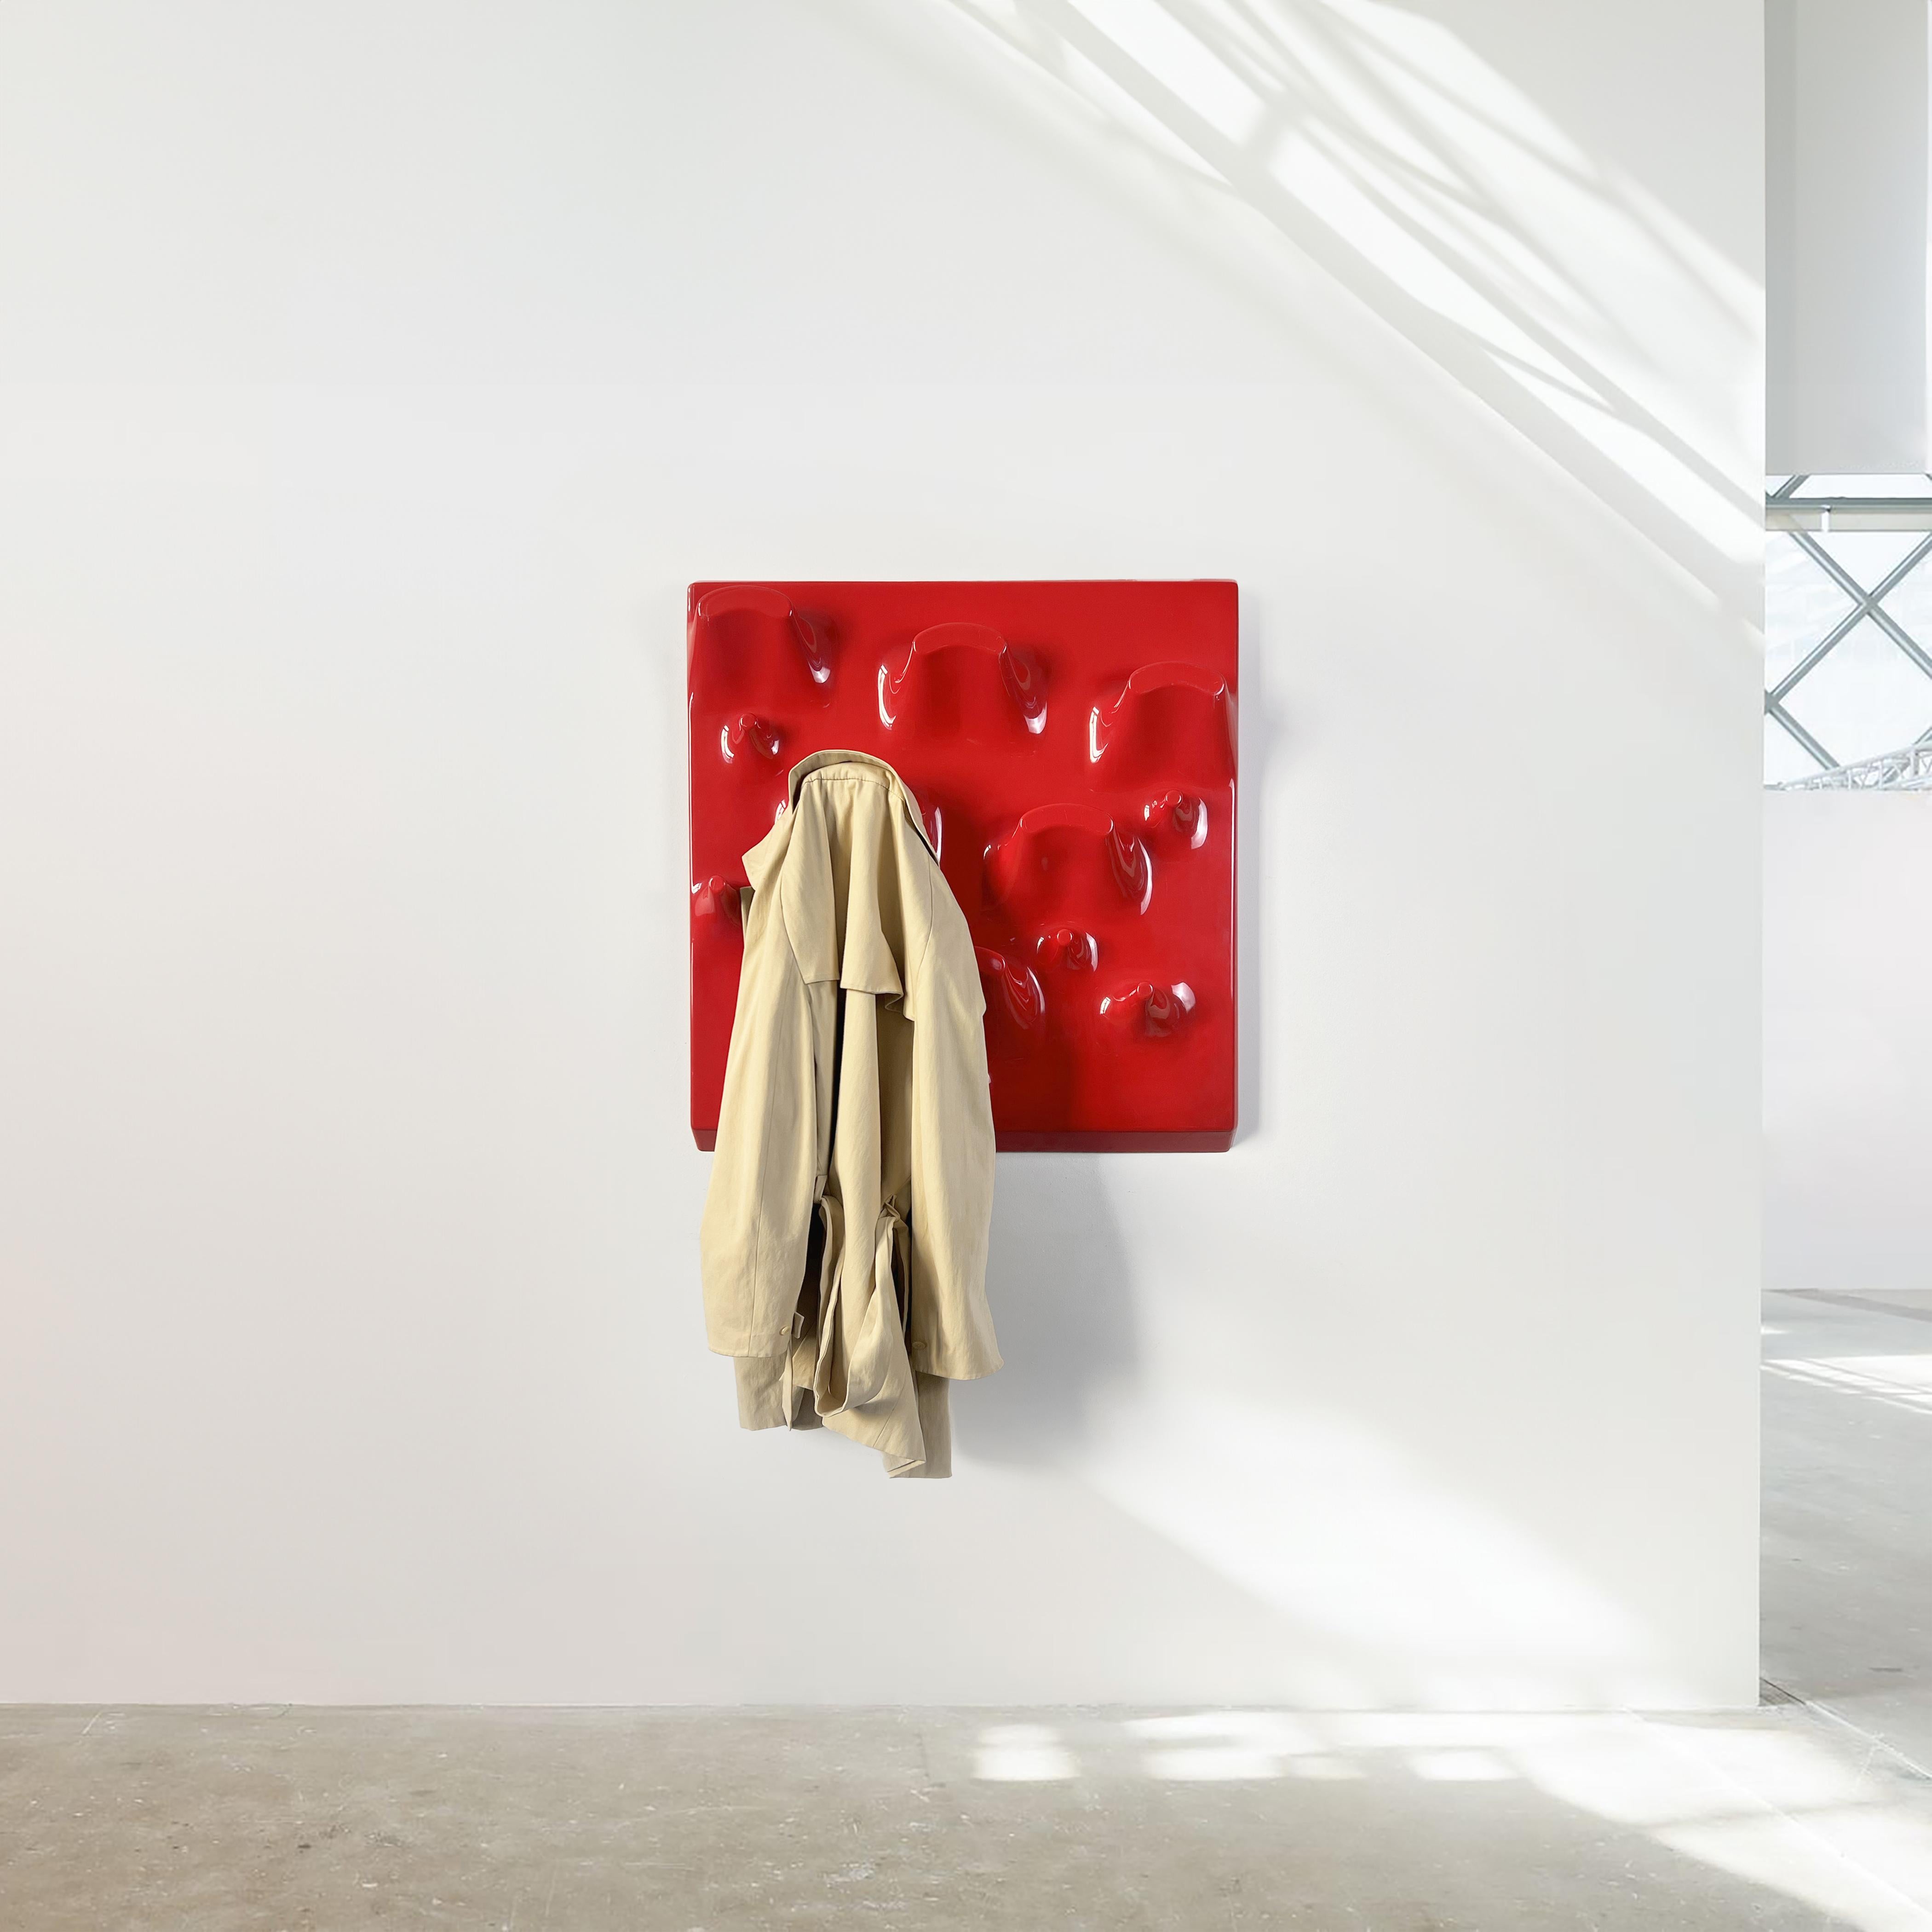 The Coat Rack Mod Slab, designed by Jonathan De Pas, Donato D’Urbino, and Paolo Lomazzi for Longato in Italy in 1969, stands as an iconic piece of mid-century modern design. This innovative and functional coat rack exemplifies the designers'